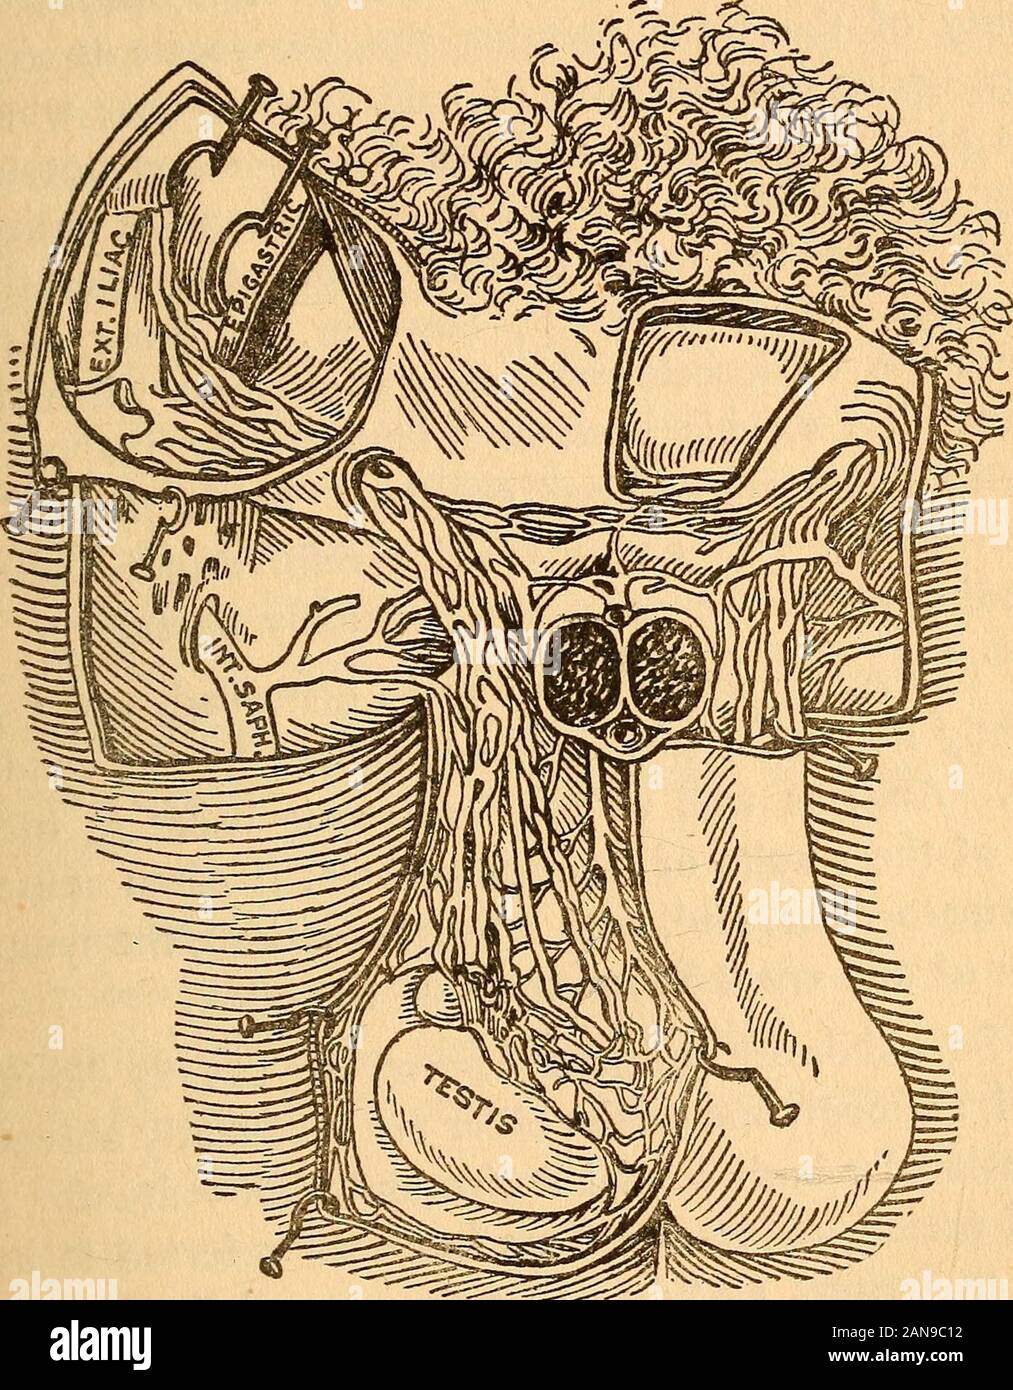 Man's mission on earth : a contribution to the science of eugenics : a short treatise on the genito-urinary organs of the male in health and disease, with a chapter on syphilis . hyexists, and in all cases nervous derangement occurs,extending to the other organs and affecting themental powers of the sufferer. Varicocele is in-variably a serious drag on the general health; it causesdyspepsia from constant nervous irritation, and gen-erally unfits the patient for mental or physical labor. The sufferer no longer pursues his daily voca-tion with pleasure or profit. The responsibilities ofsturdy ma Stock Photo